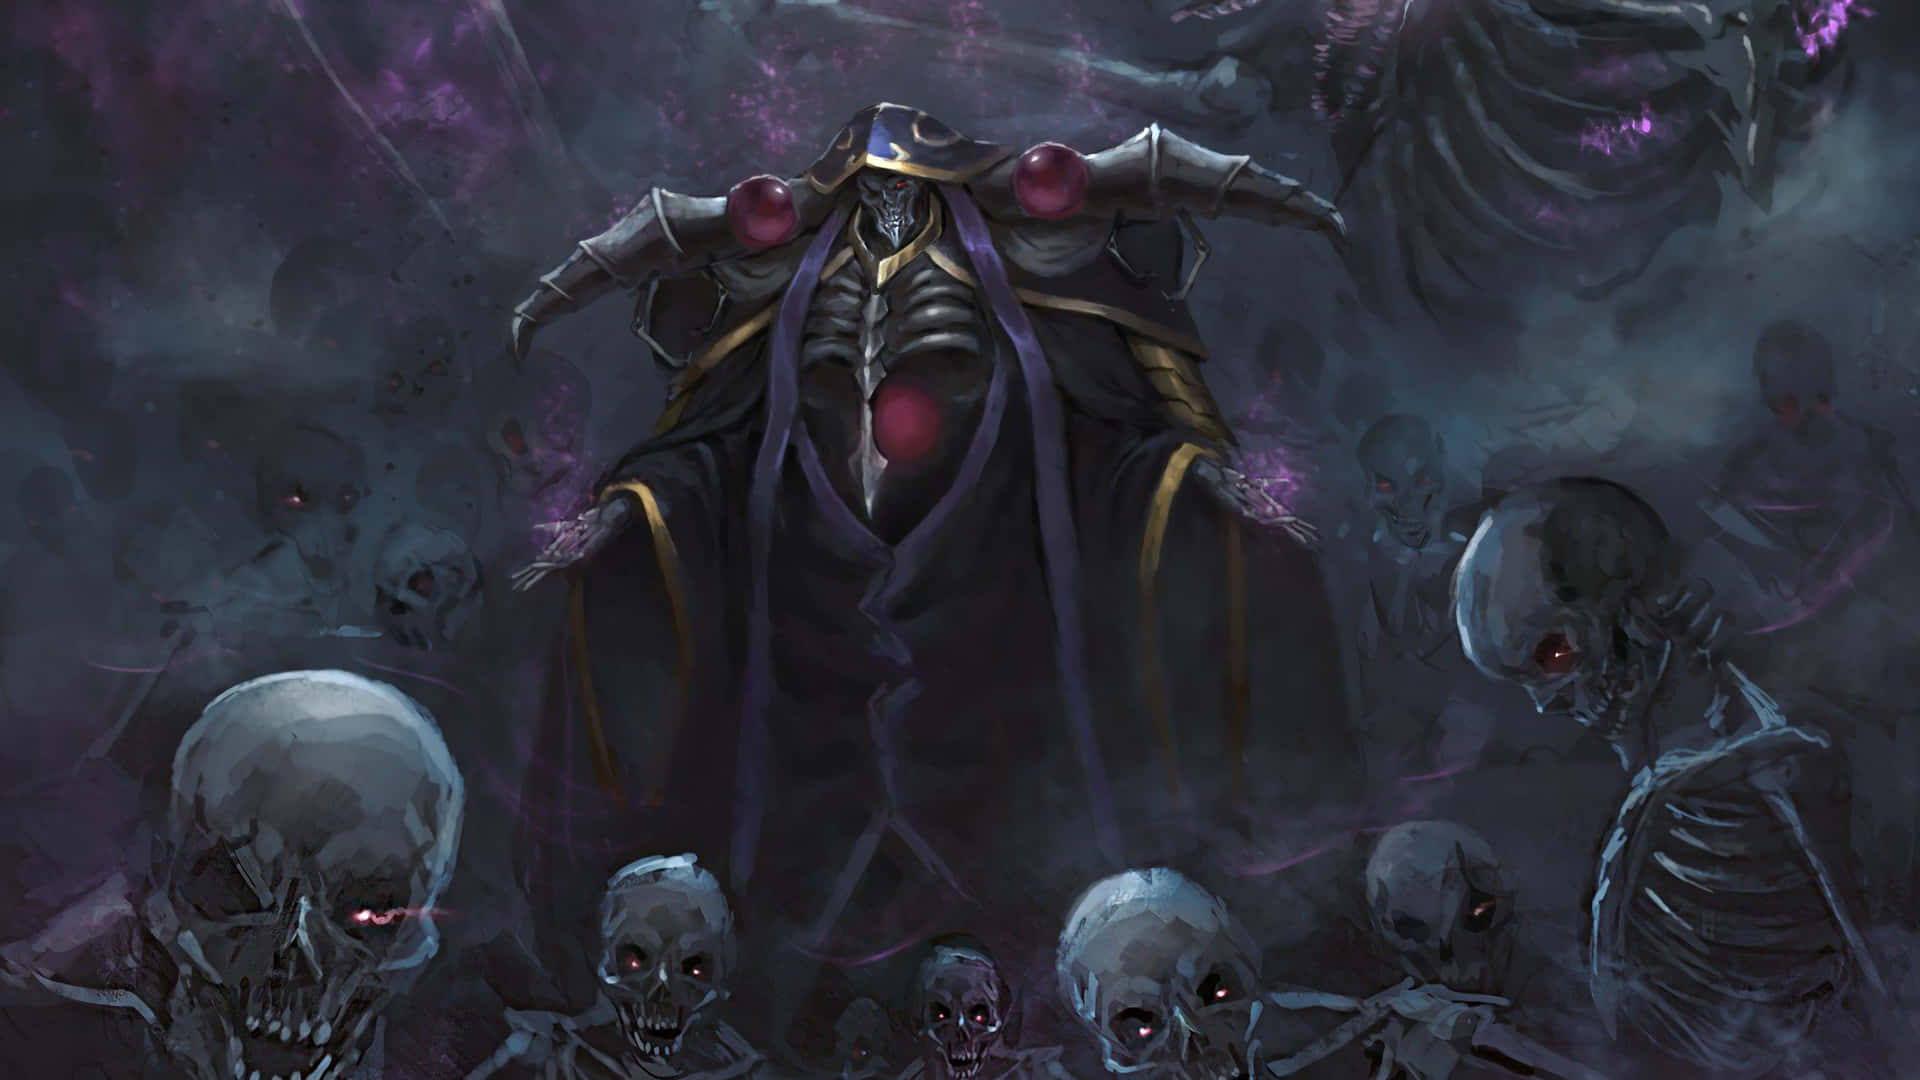 Ainz Ooal Gown stands on the brink of a new age